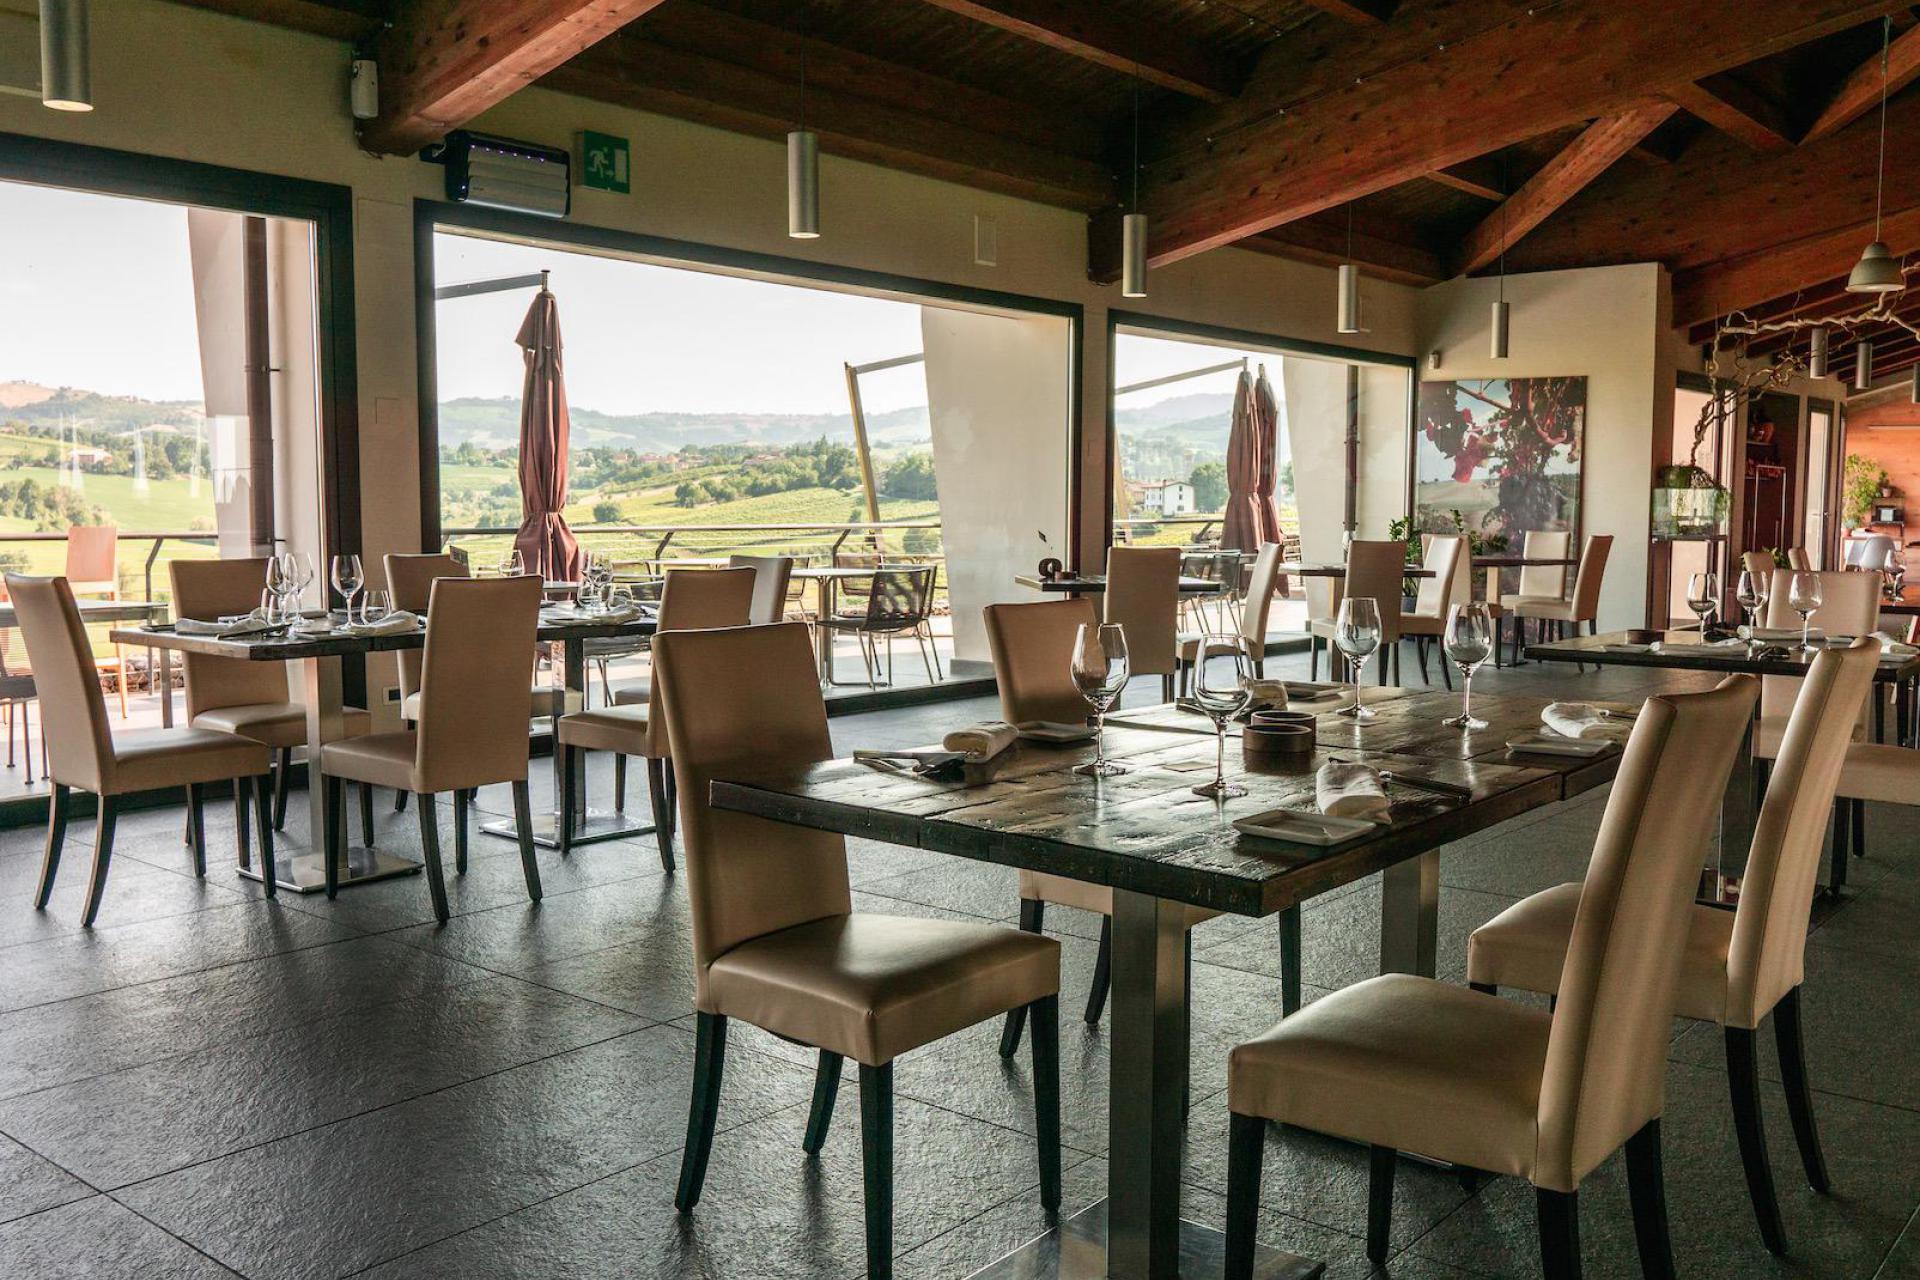 Agriturismo Emilia Romagna Agriturismo with relaxed atmosphere and good cuisine